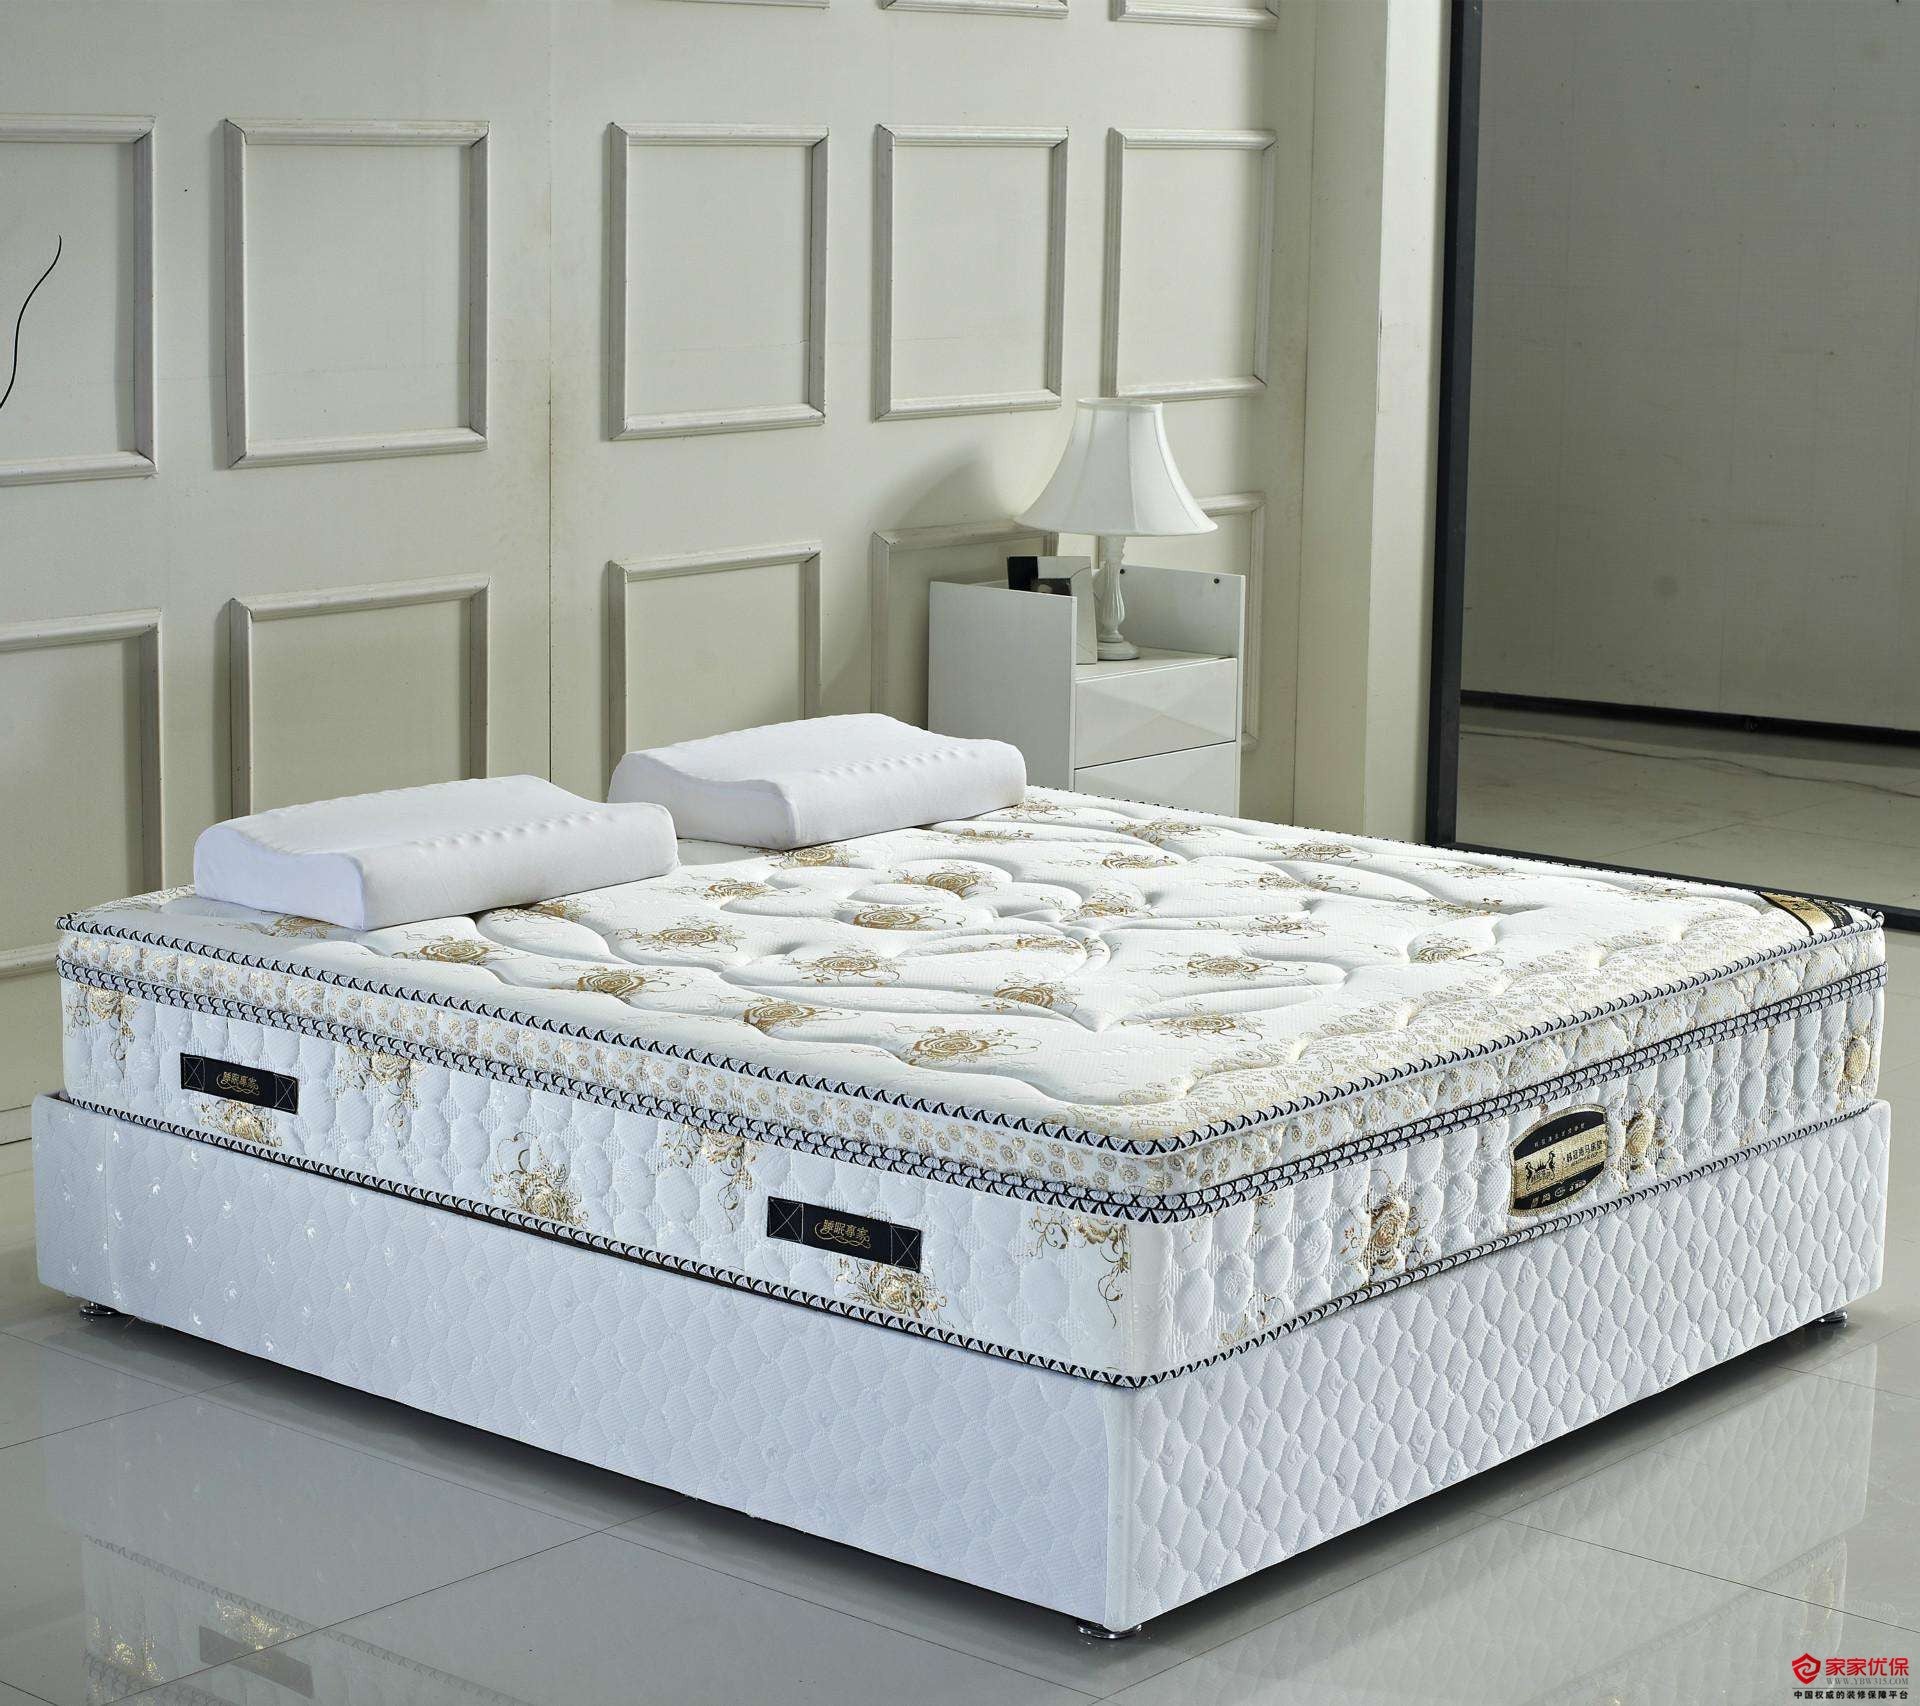 What Kind of Mattress Will You Buy?